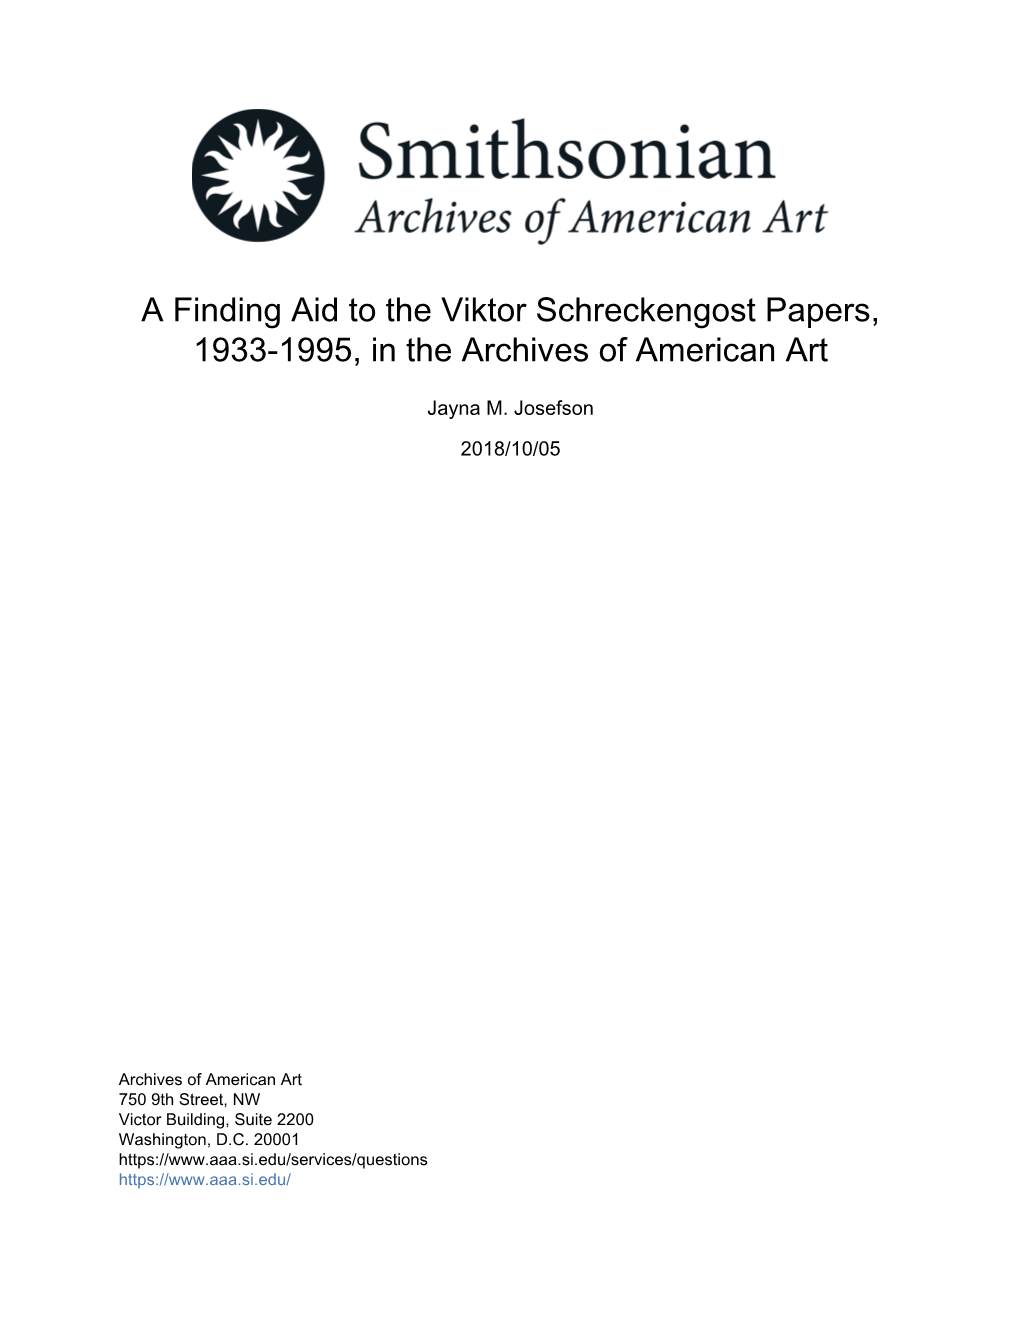 A Finding Aid to the Viktor Schreckengost Papers, 1933-1995, in the Archives of American Art